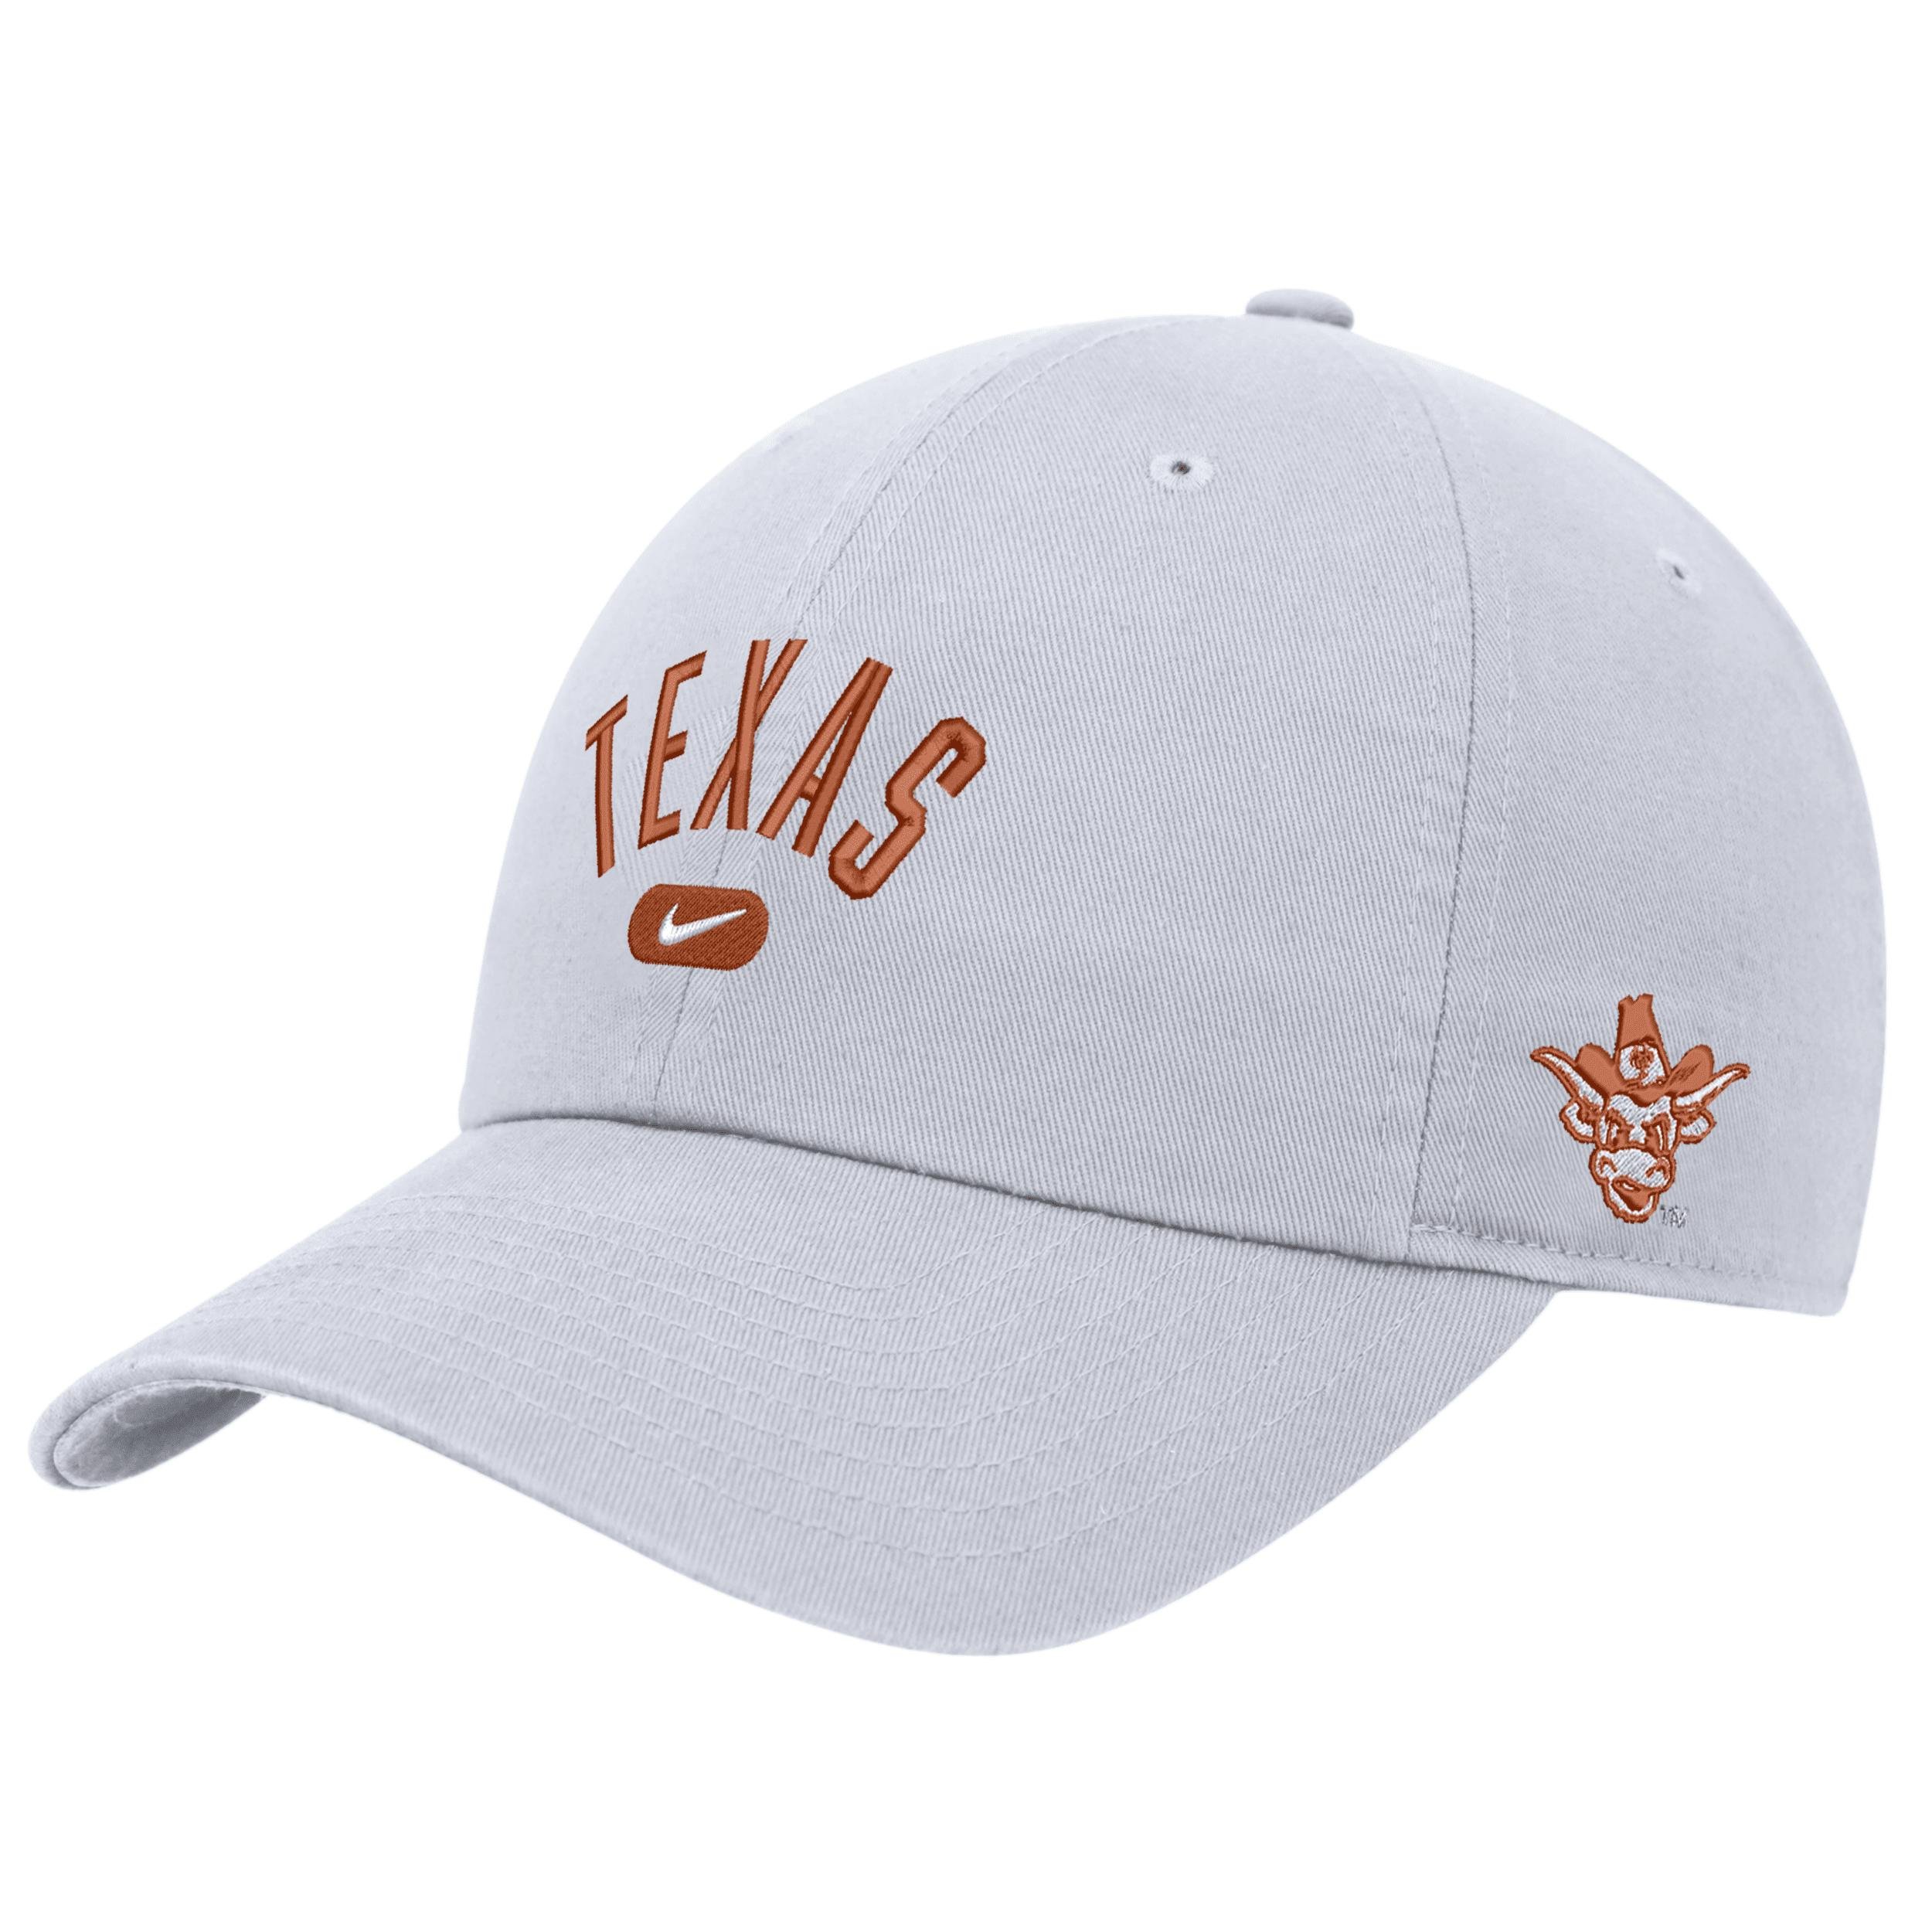 Texas Nike Unisex College Campus Cap by NIKE